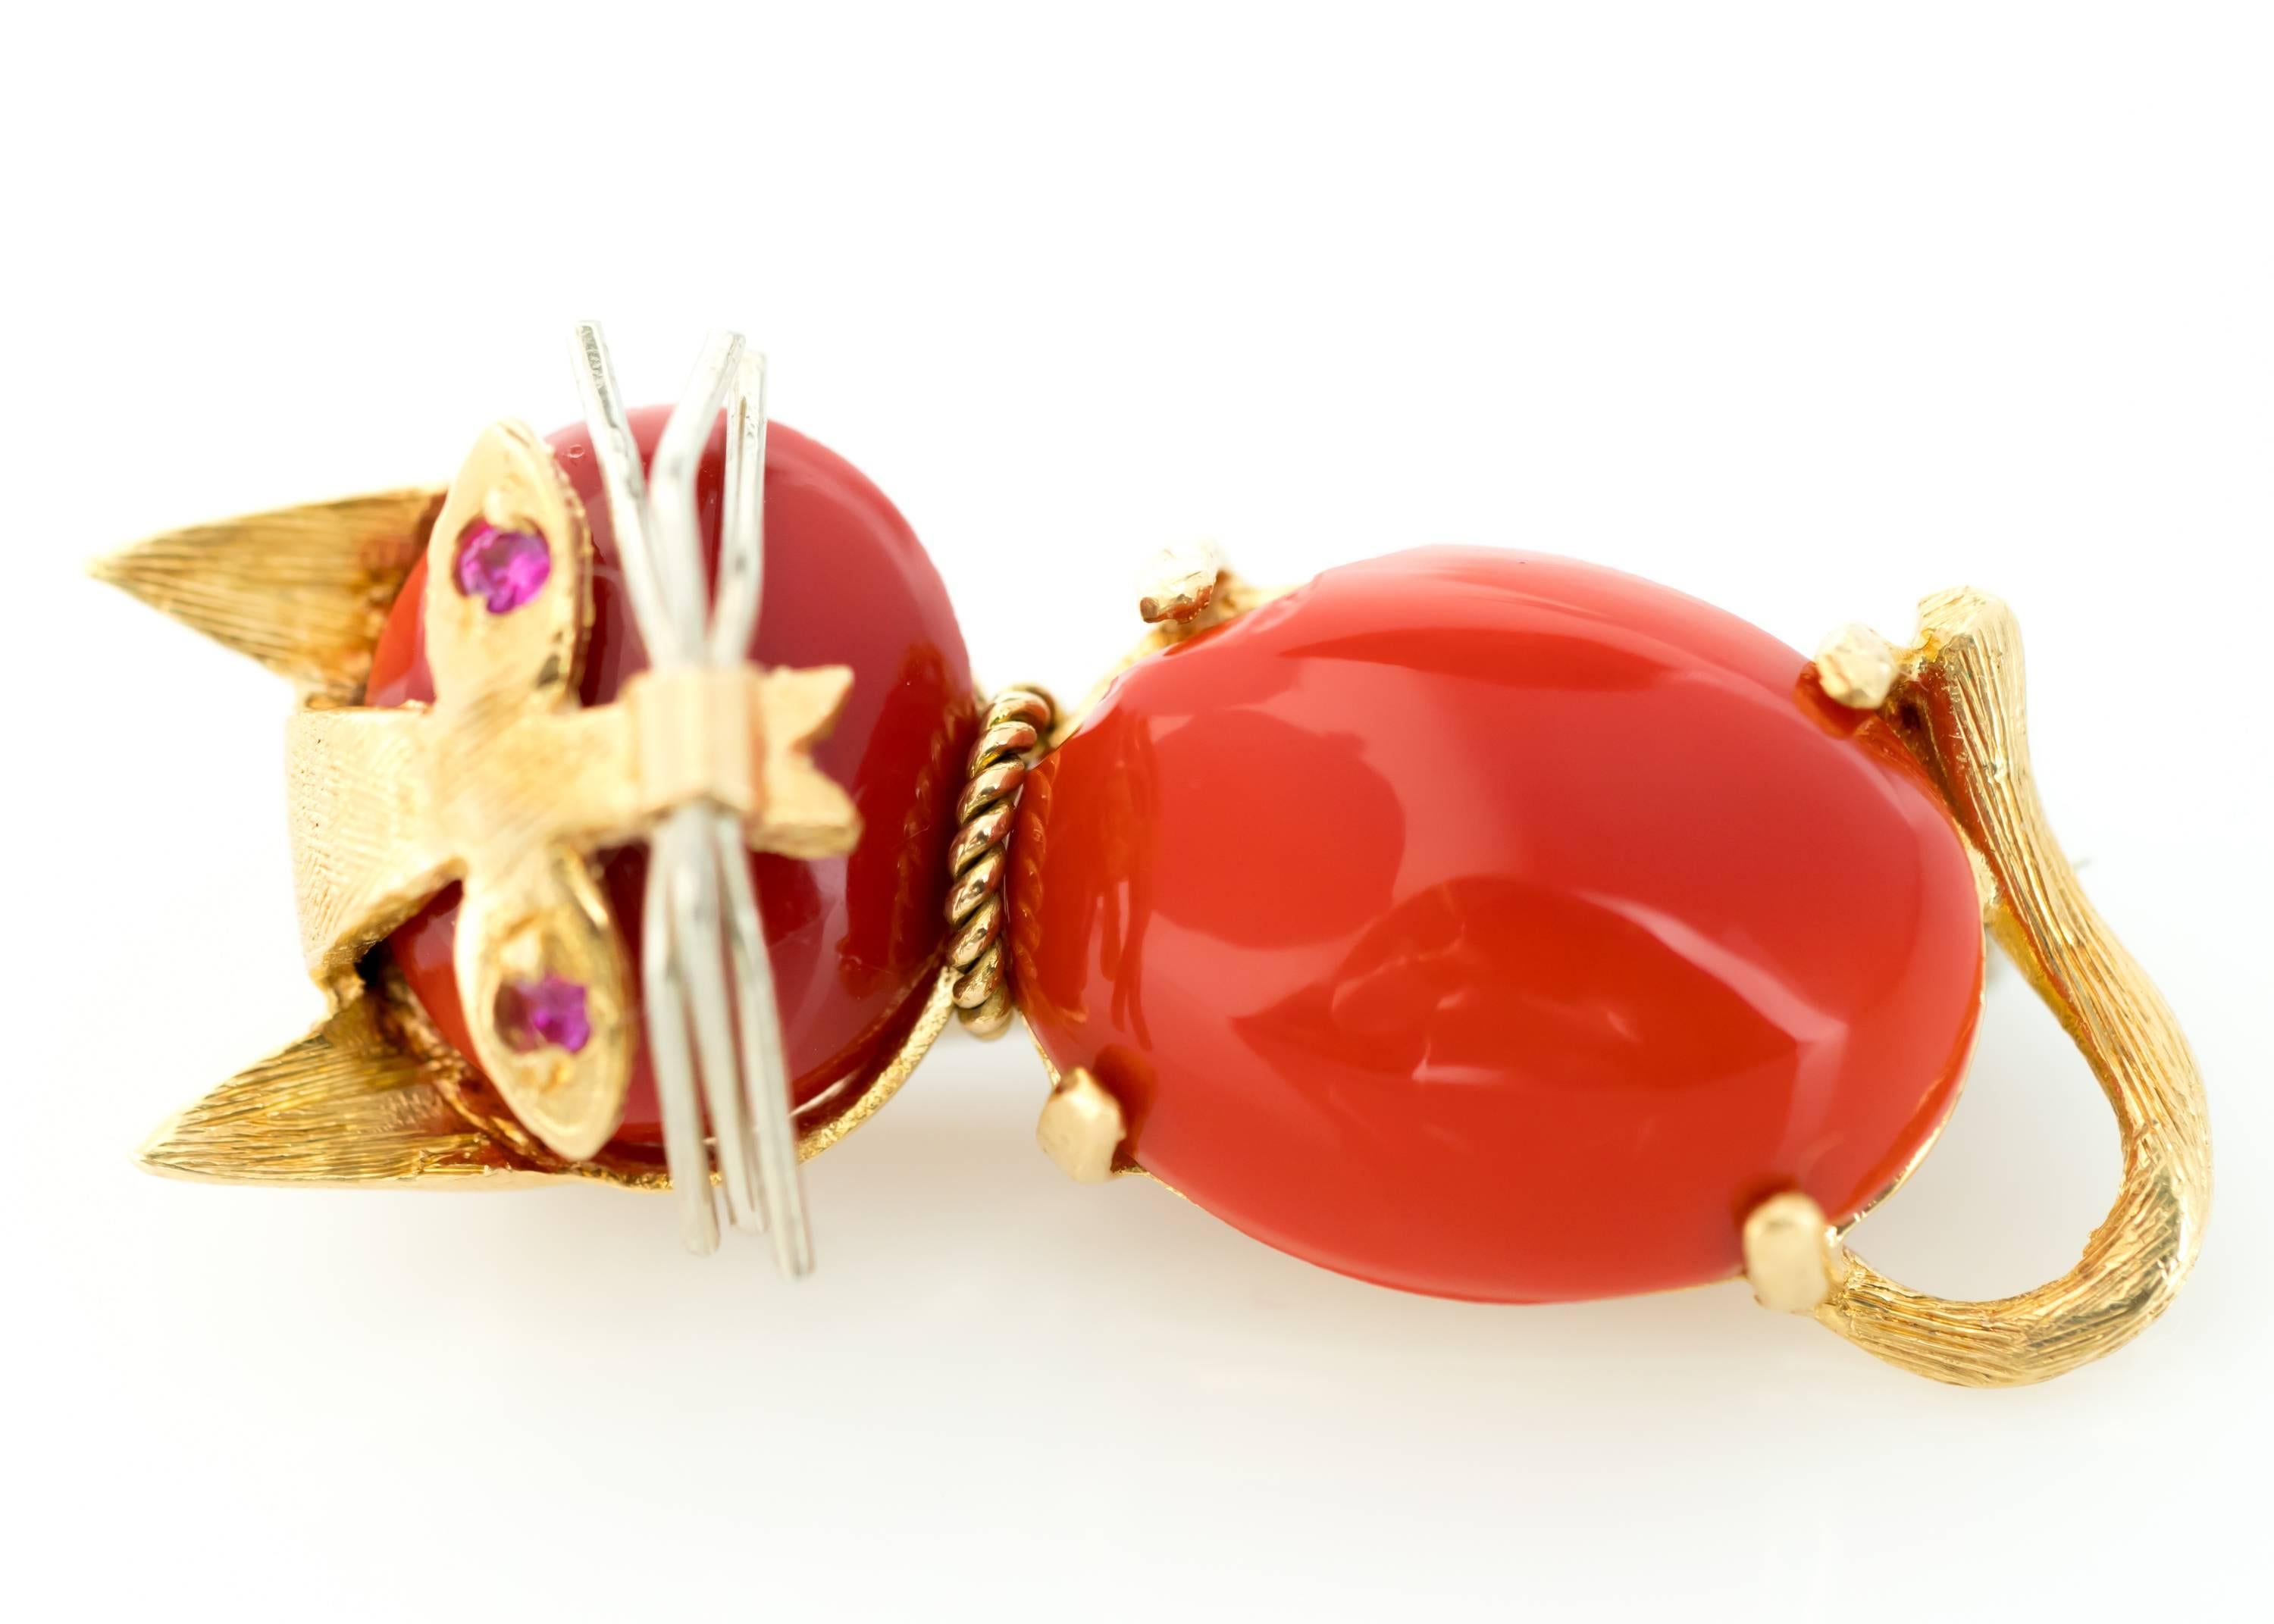 1960s Coral Cat Brooch with Ruby Eyes and 18 Karat Gold

Features 2 Ruby Eyes, Coral Head and Body and 18 Karat White Gold Whiskers. 18 Karat Yellow Gold frames the head and body and adds facial marking details to the face. The Tail, Ears, 4 tiny